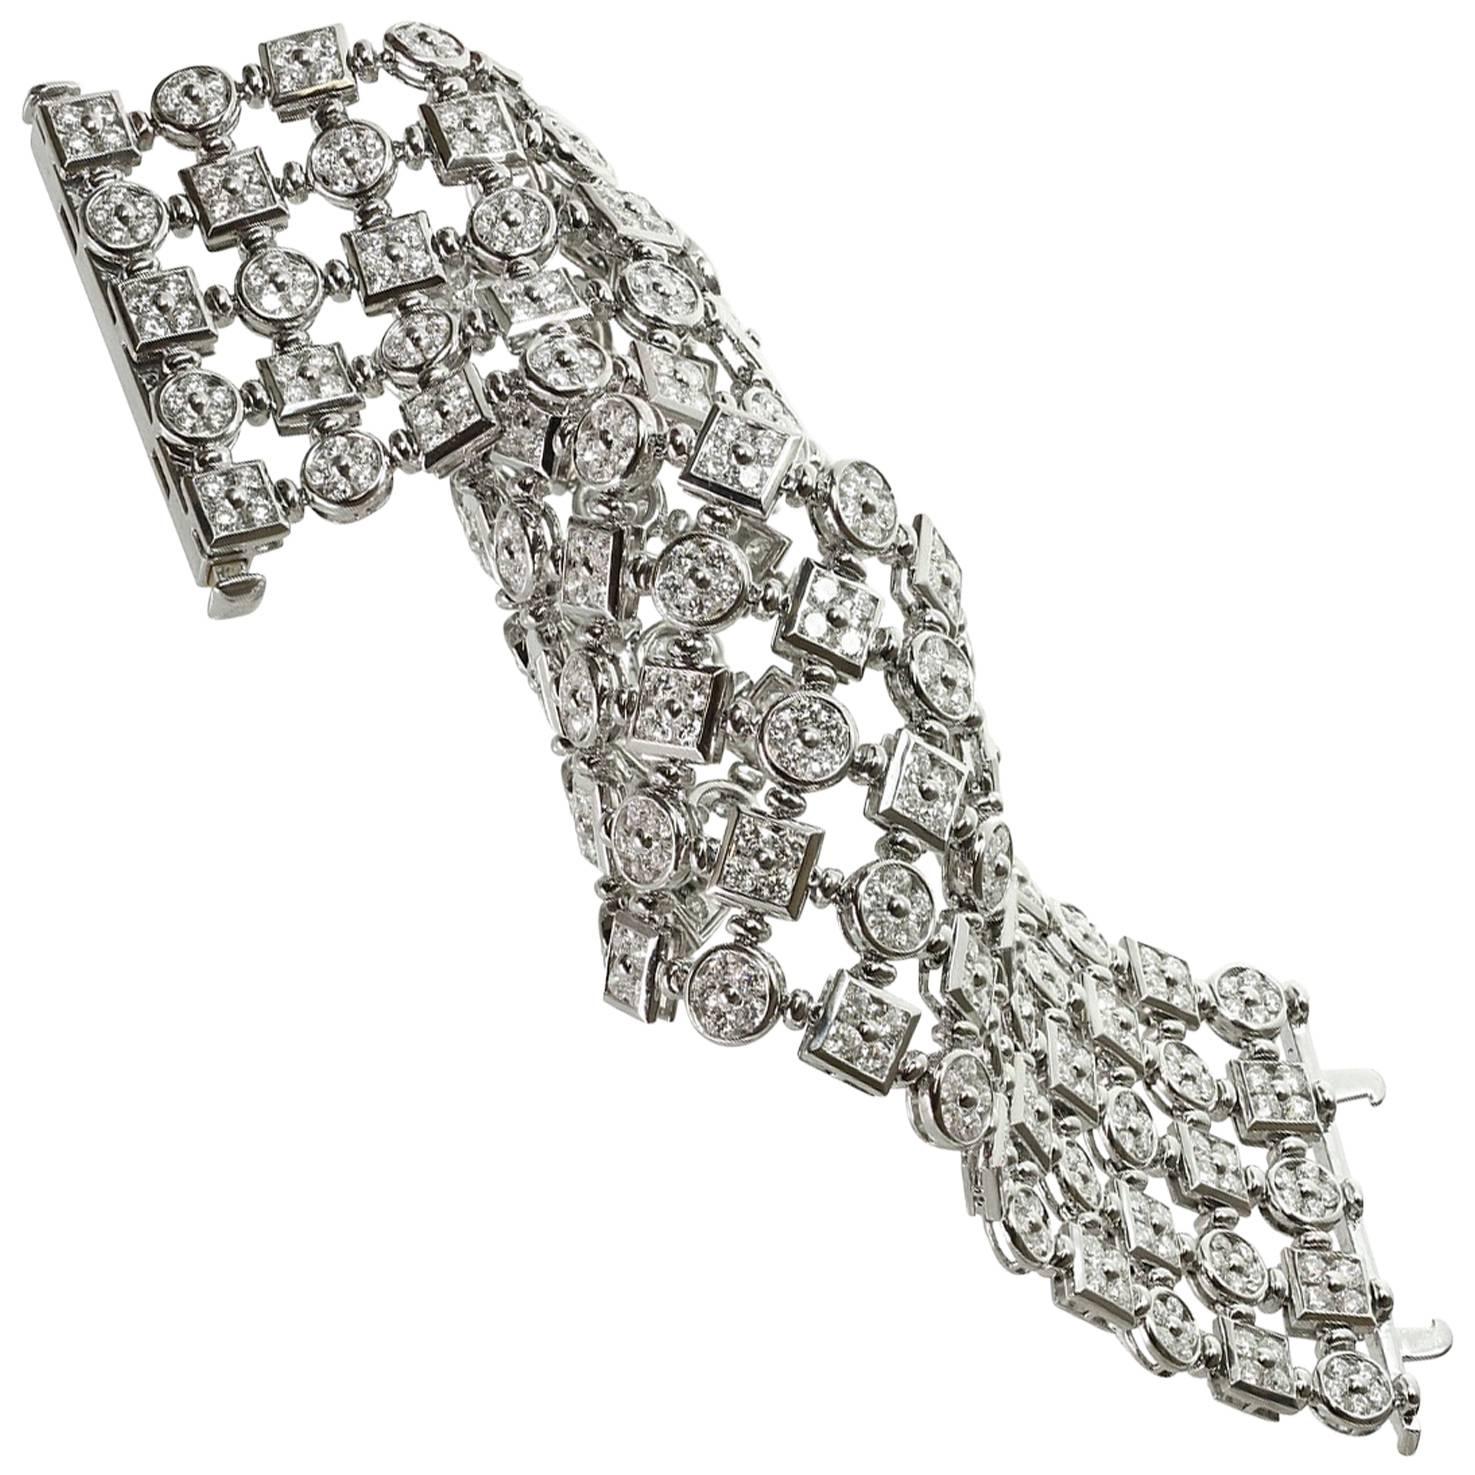 This fabulous flexible wide bracelet features four rows of round and square links set with round brilliant-cut diamonds of an estimated 24.0 carats. This magnificent 18k white gold bracelet feels and sparkles like a dream! Made in Italy circa 2000s.